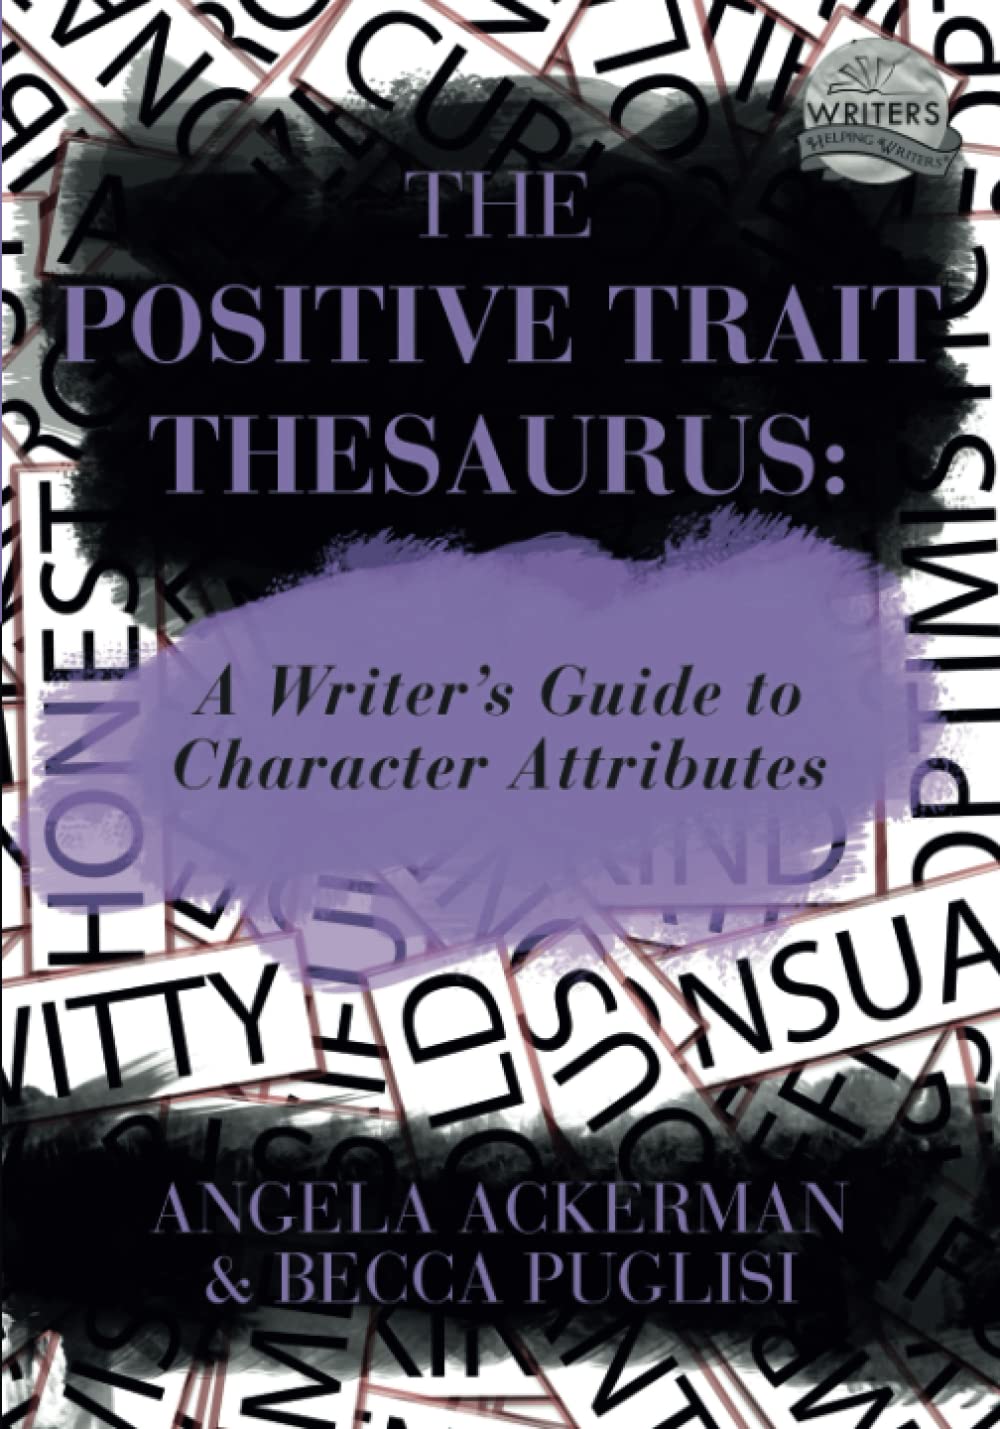 The Positive Trait Thesaurus: A Writer’s Guide to Character Attributes